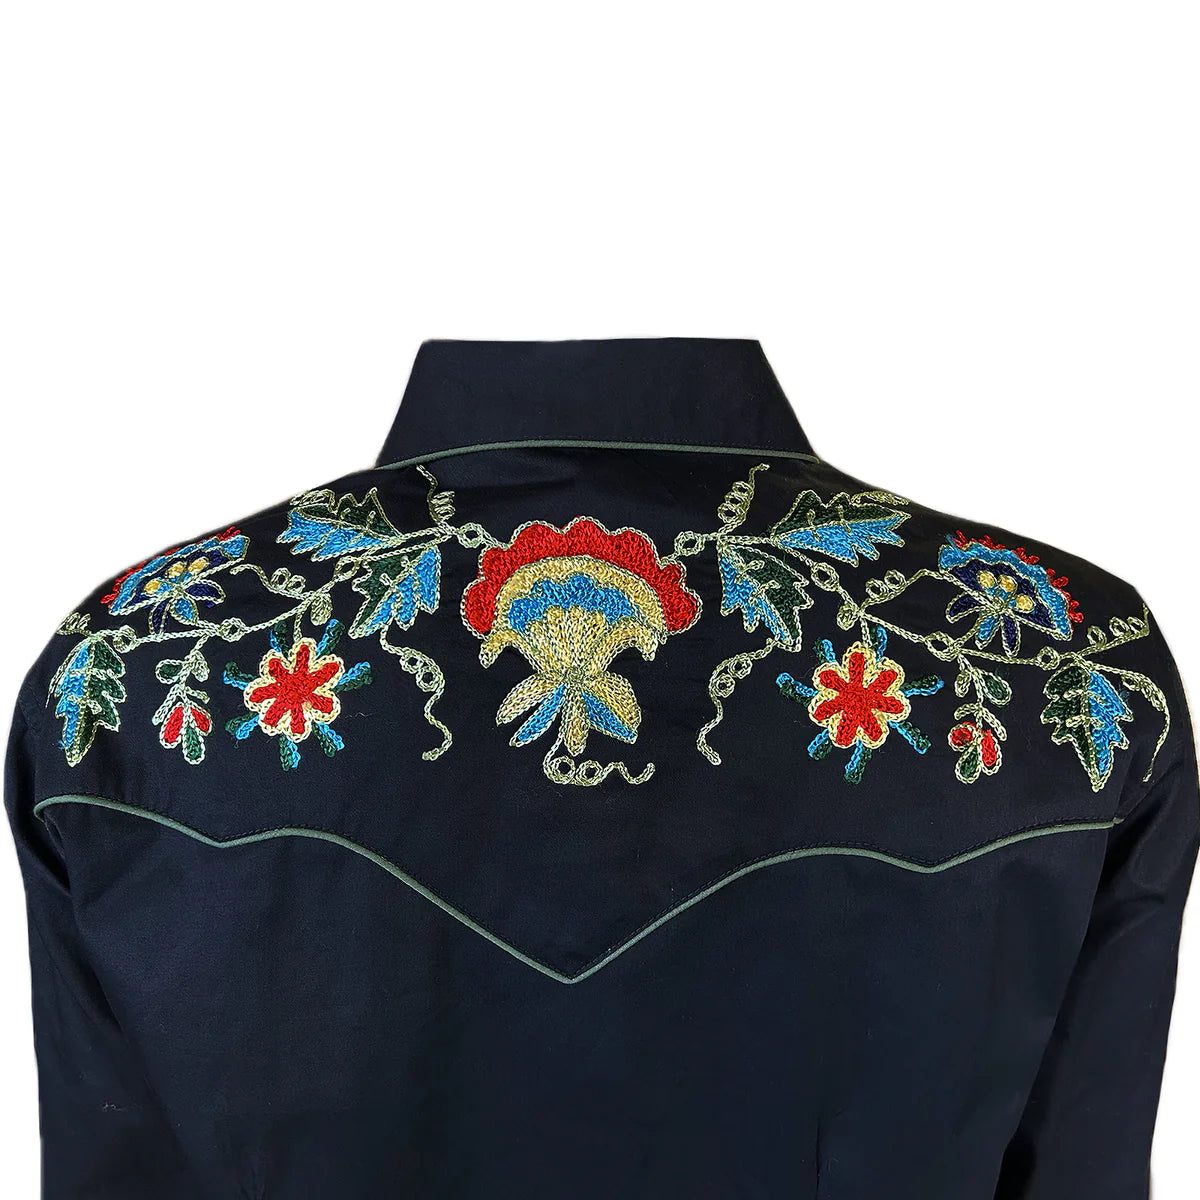 Rockmount Ranch Wear Ladies Western Shirt Floral Embroidery on Black Front